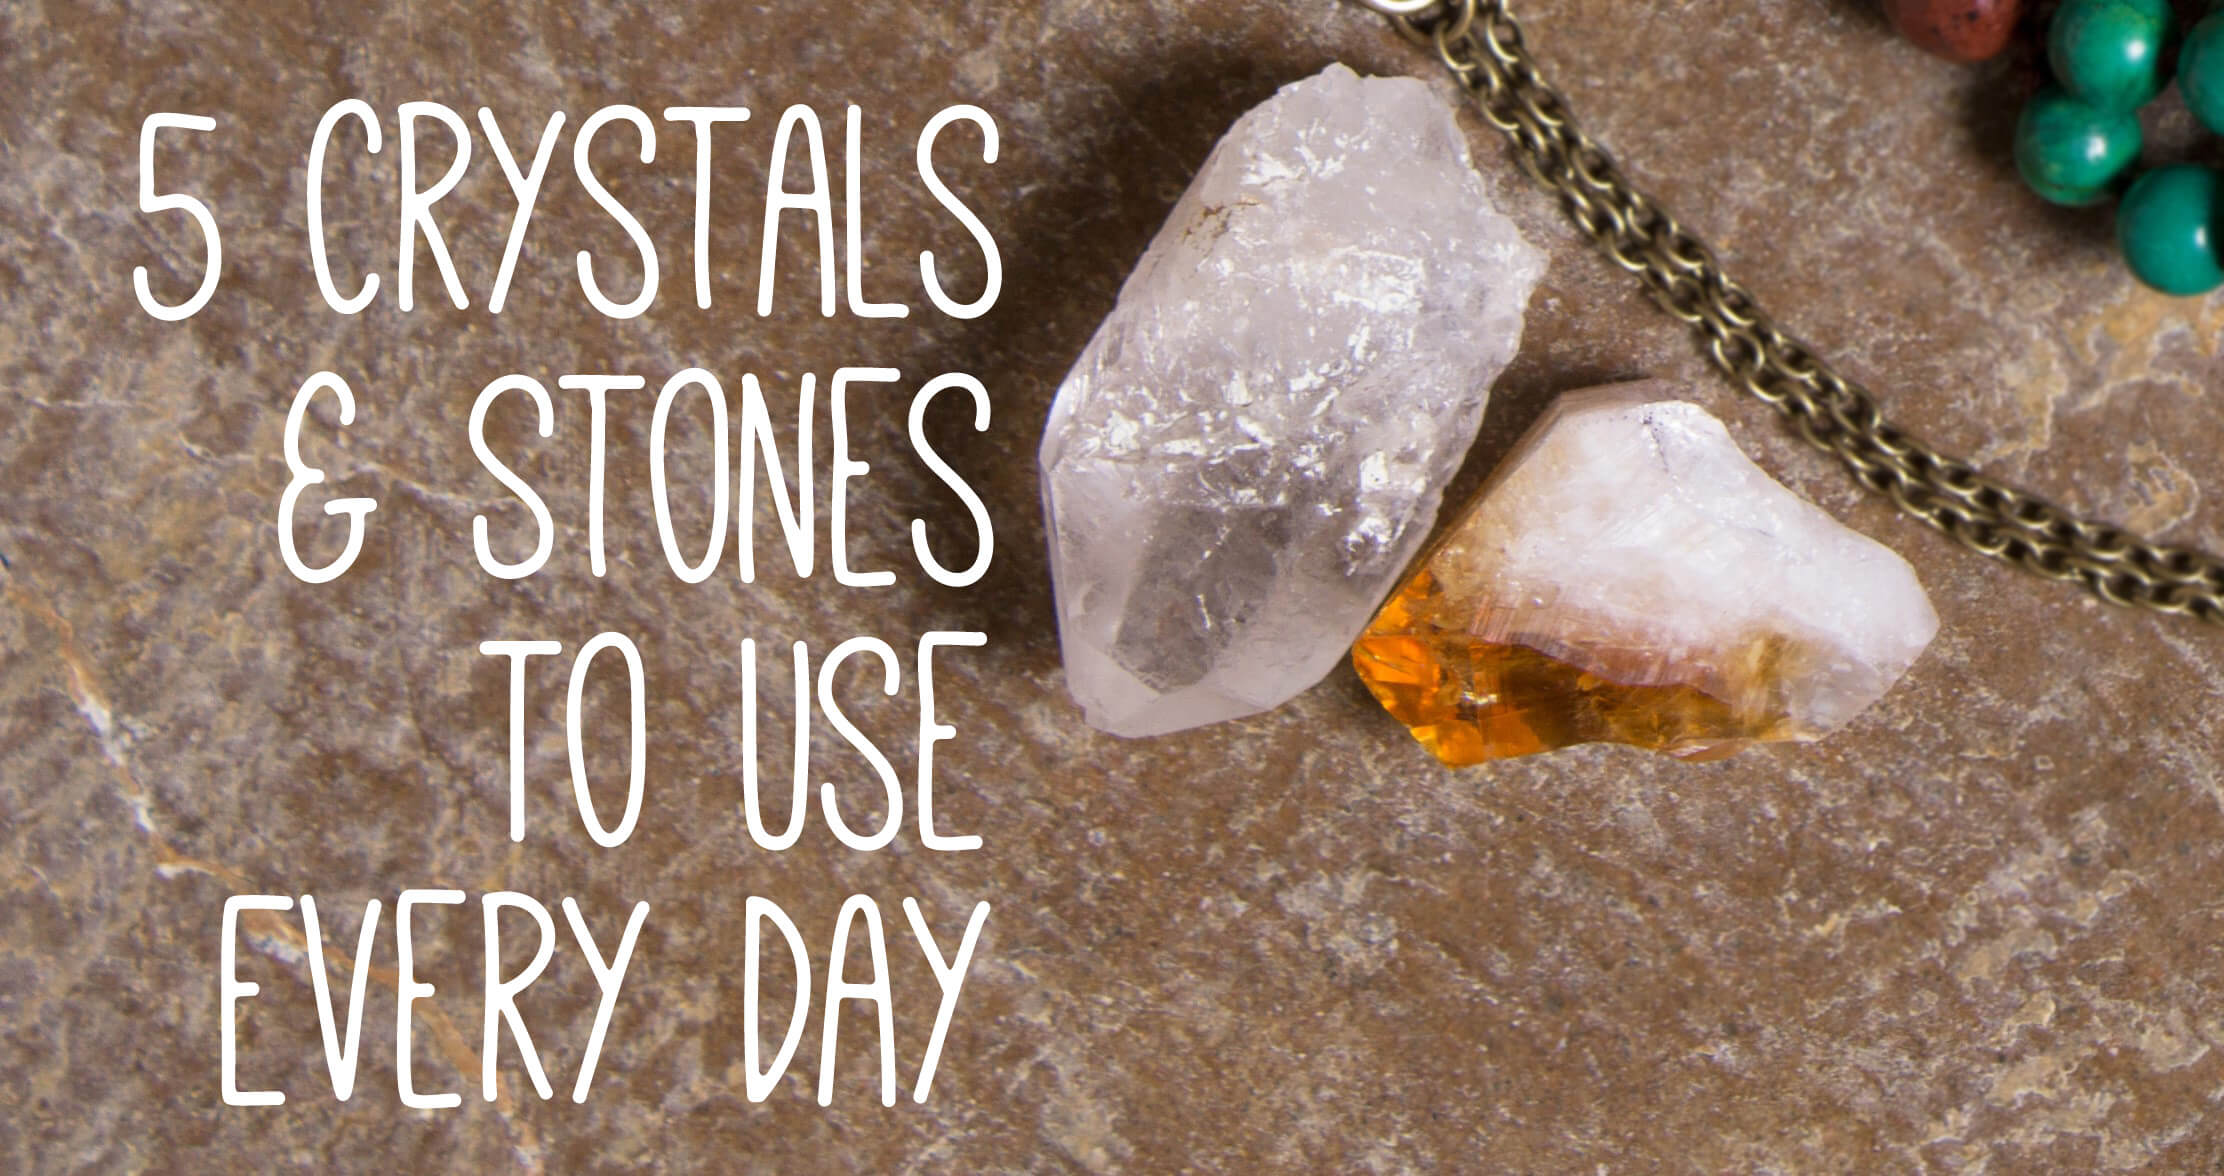 crystals and stones title page - 5 Crystals & Stones to Use Every Day